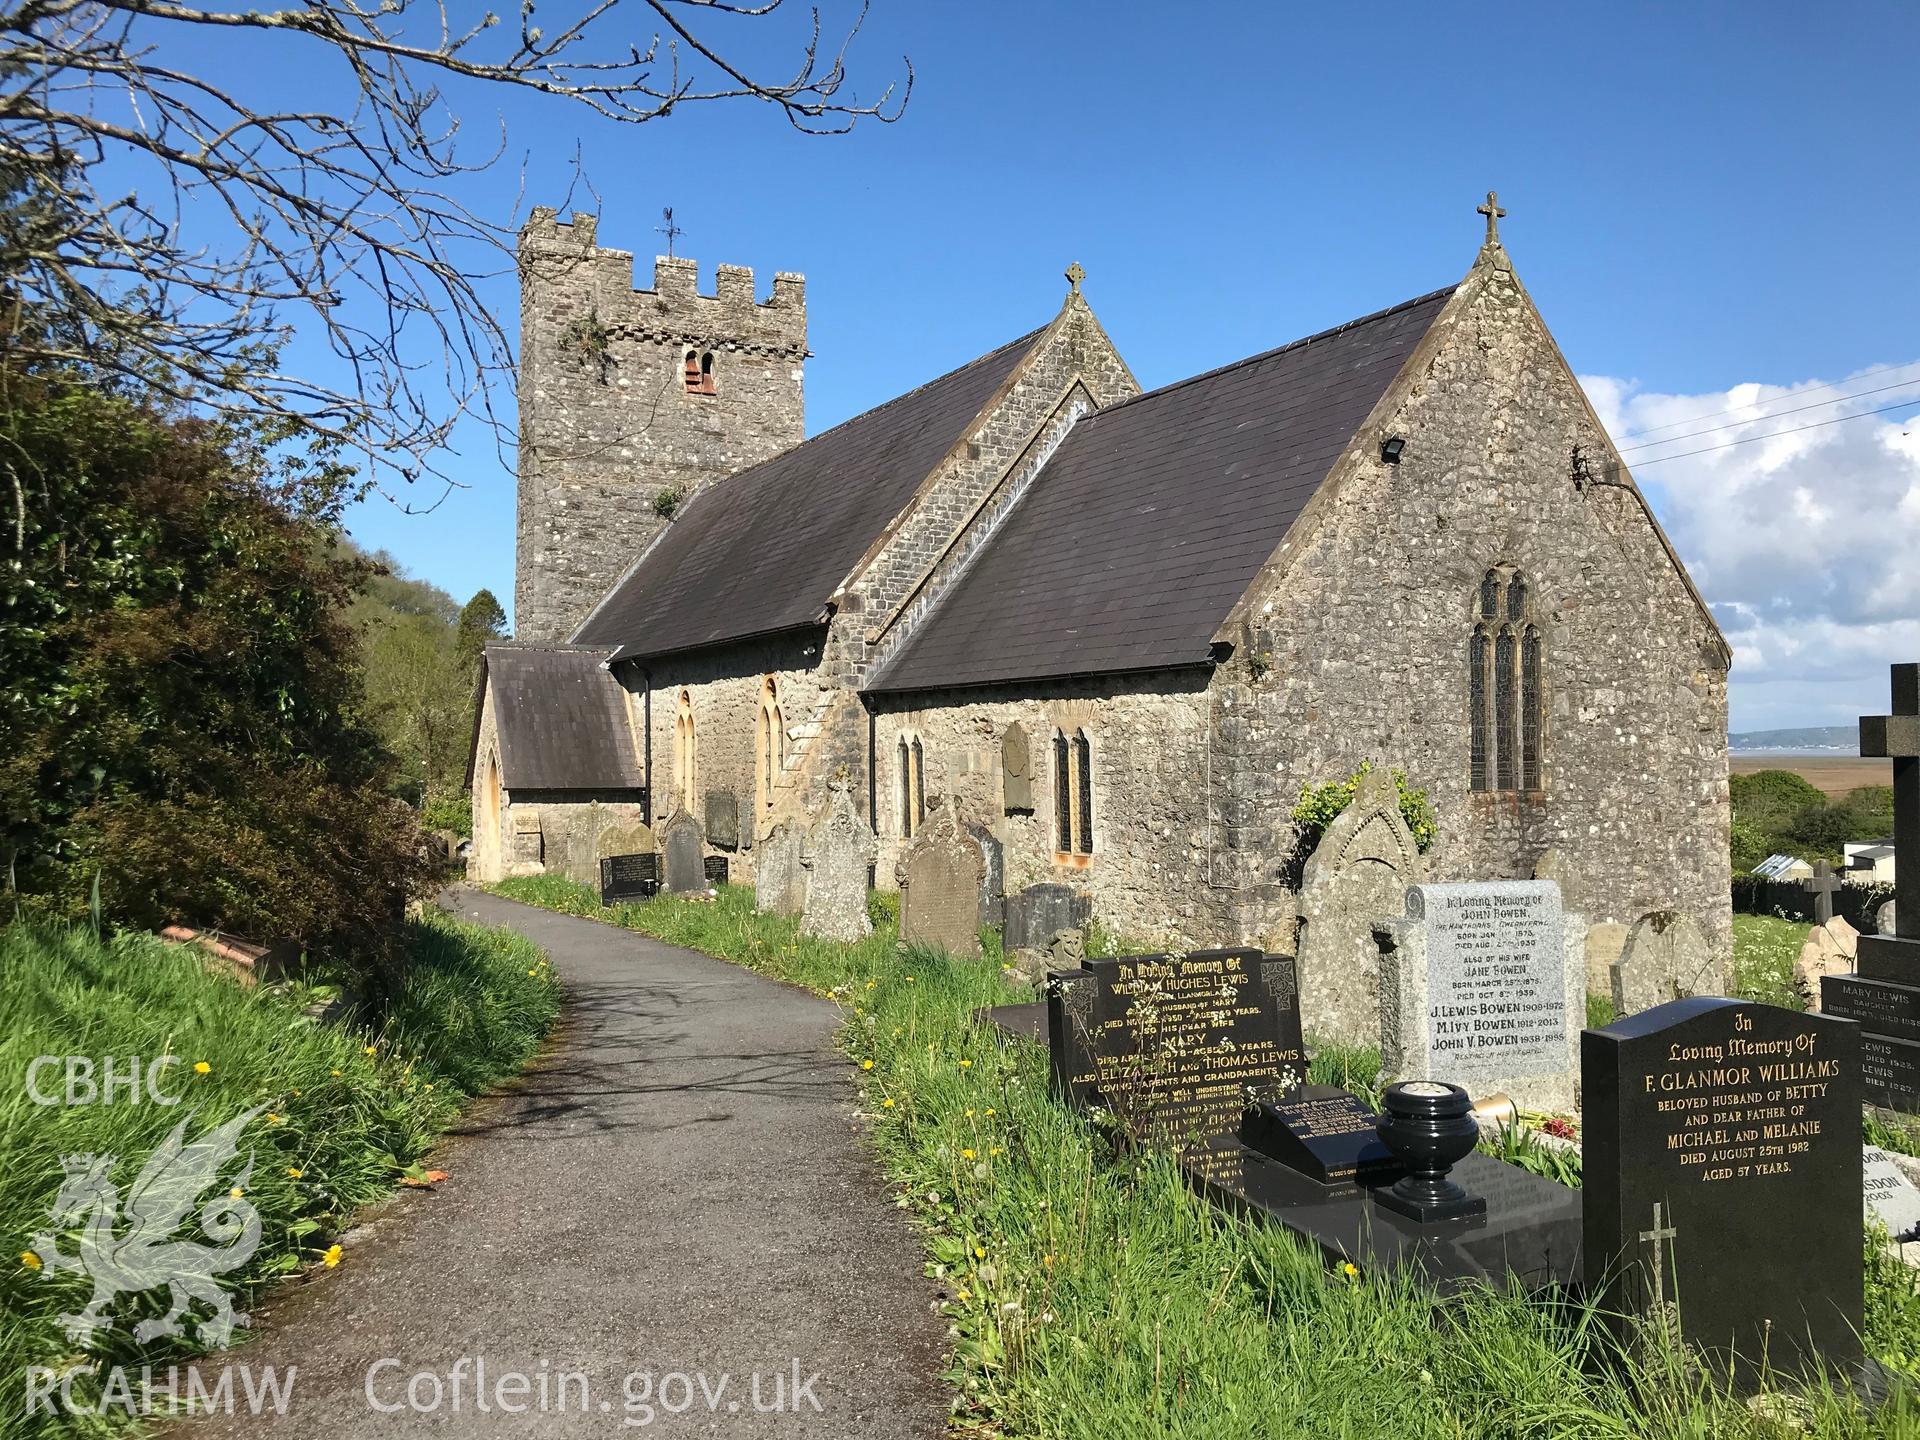 Digital colour photograph showing exterior view of St Rhidian and Illtyd's church, Llanrhidian, taken by Paul R. Davis on 5th May 2019.